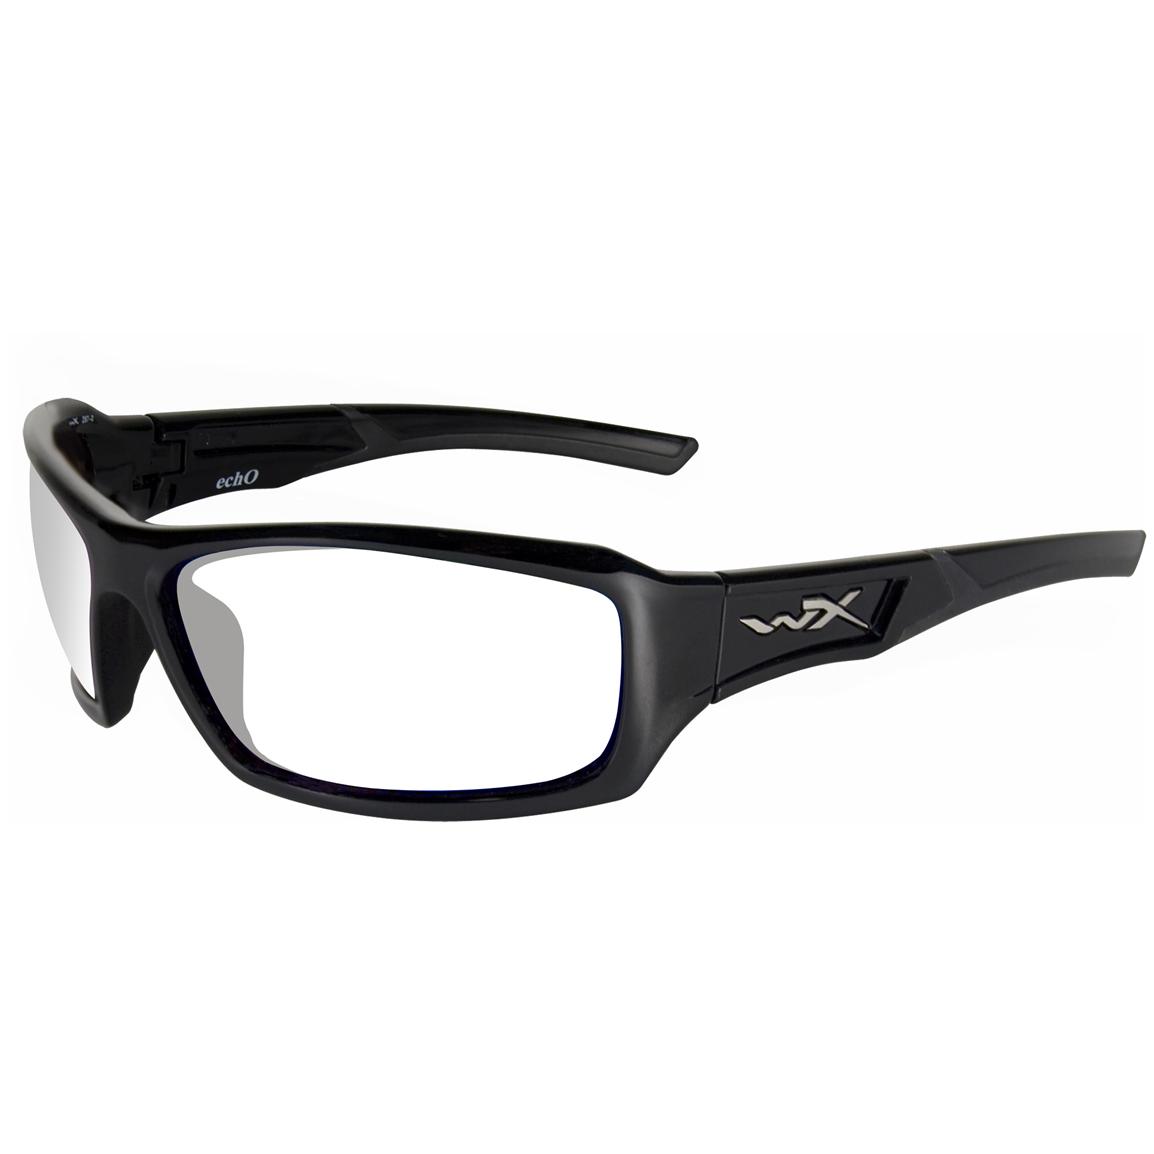 Wiley X Wx Echo Tactical Safety Glasses Clear Lenses Gloss Black Frame 611832 Sunglasses